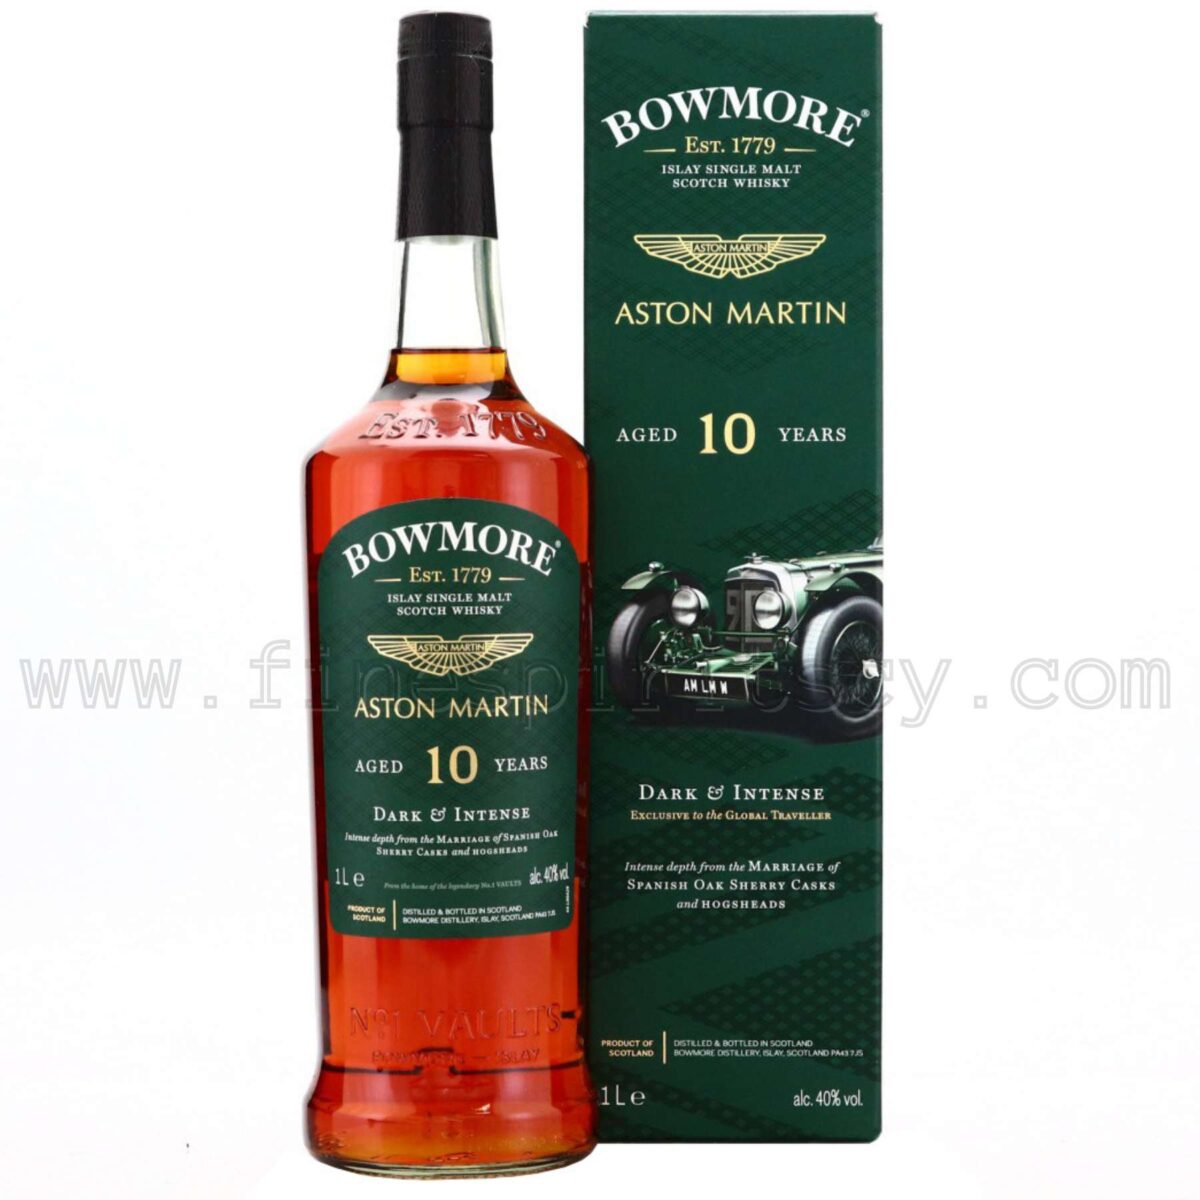 Bowmore Aston Martin 10 Year Old Price Cyprus CY Whisky Cava Shop Online